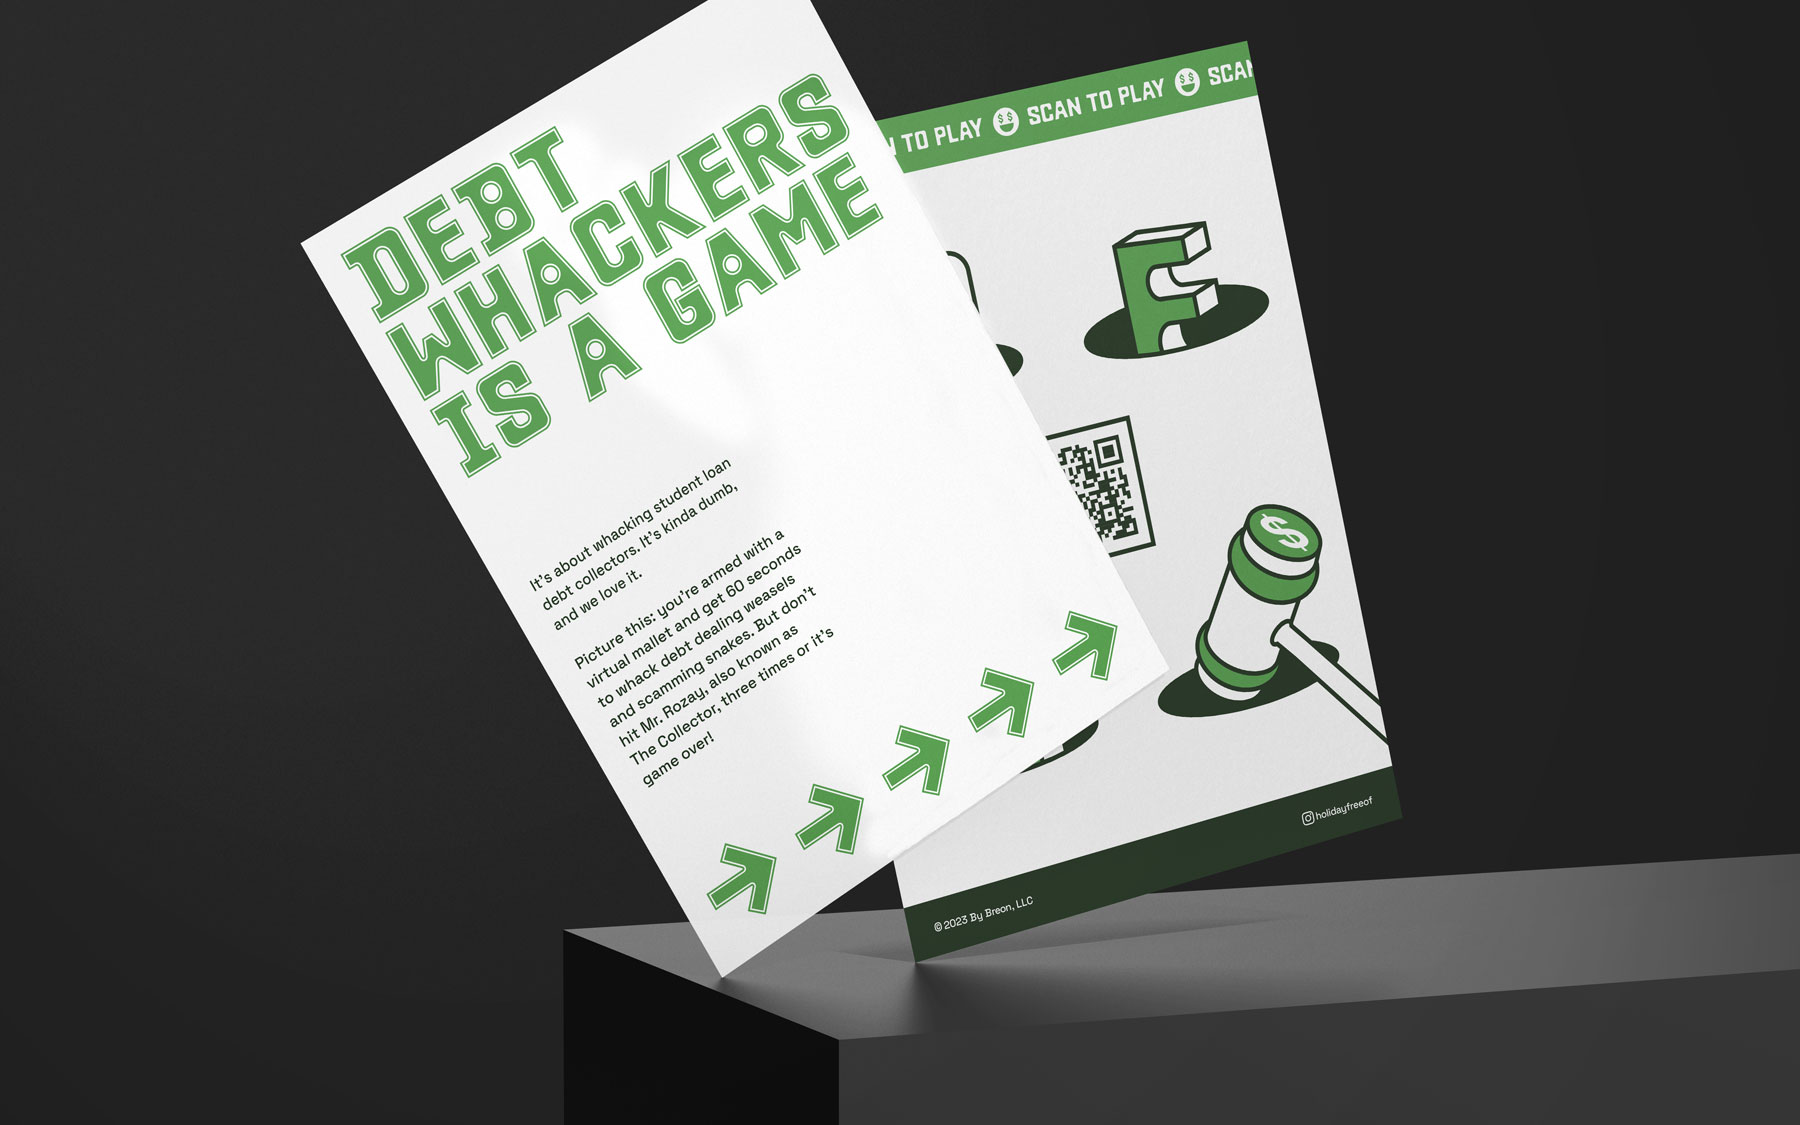 Image of the front and back of the 'Debt Whackers' card in front of a black background.